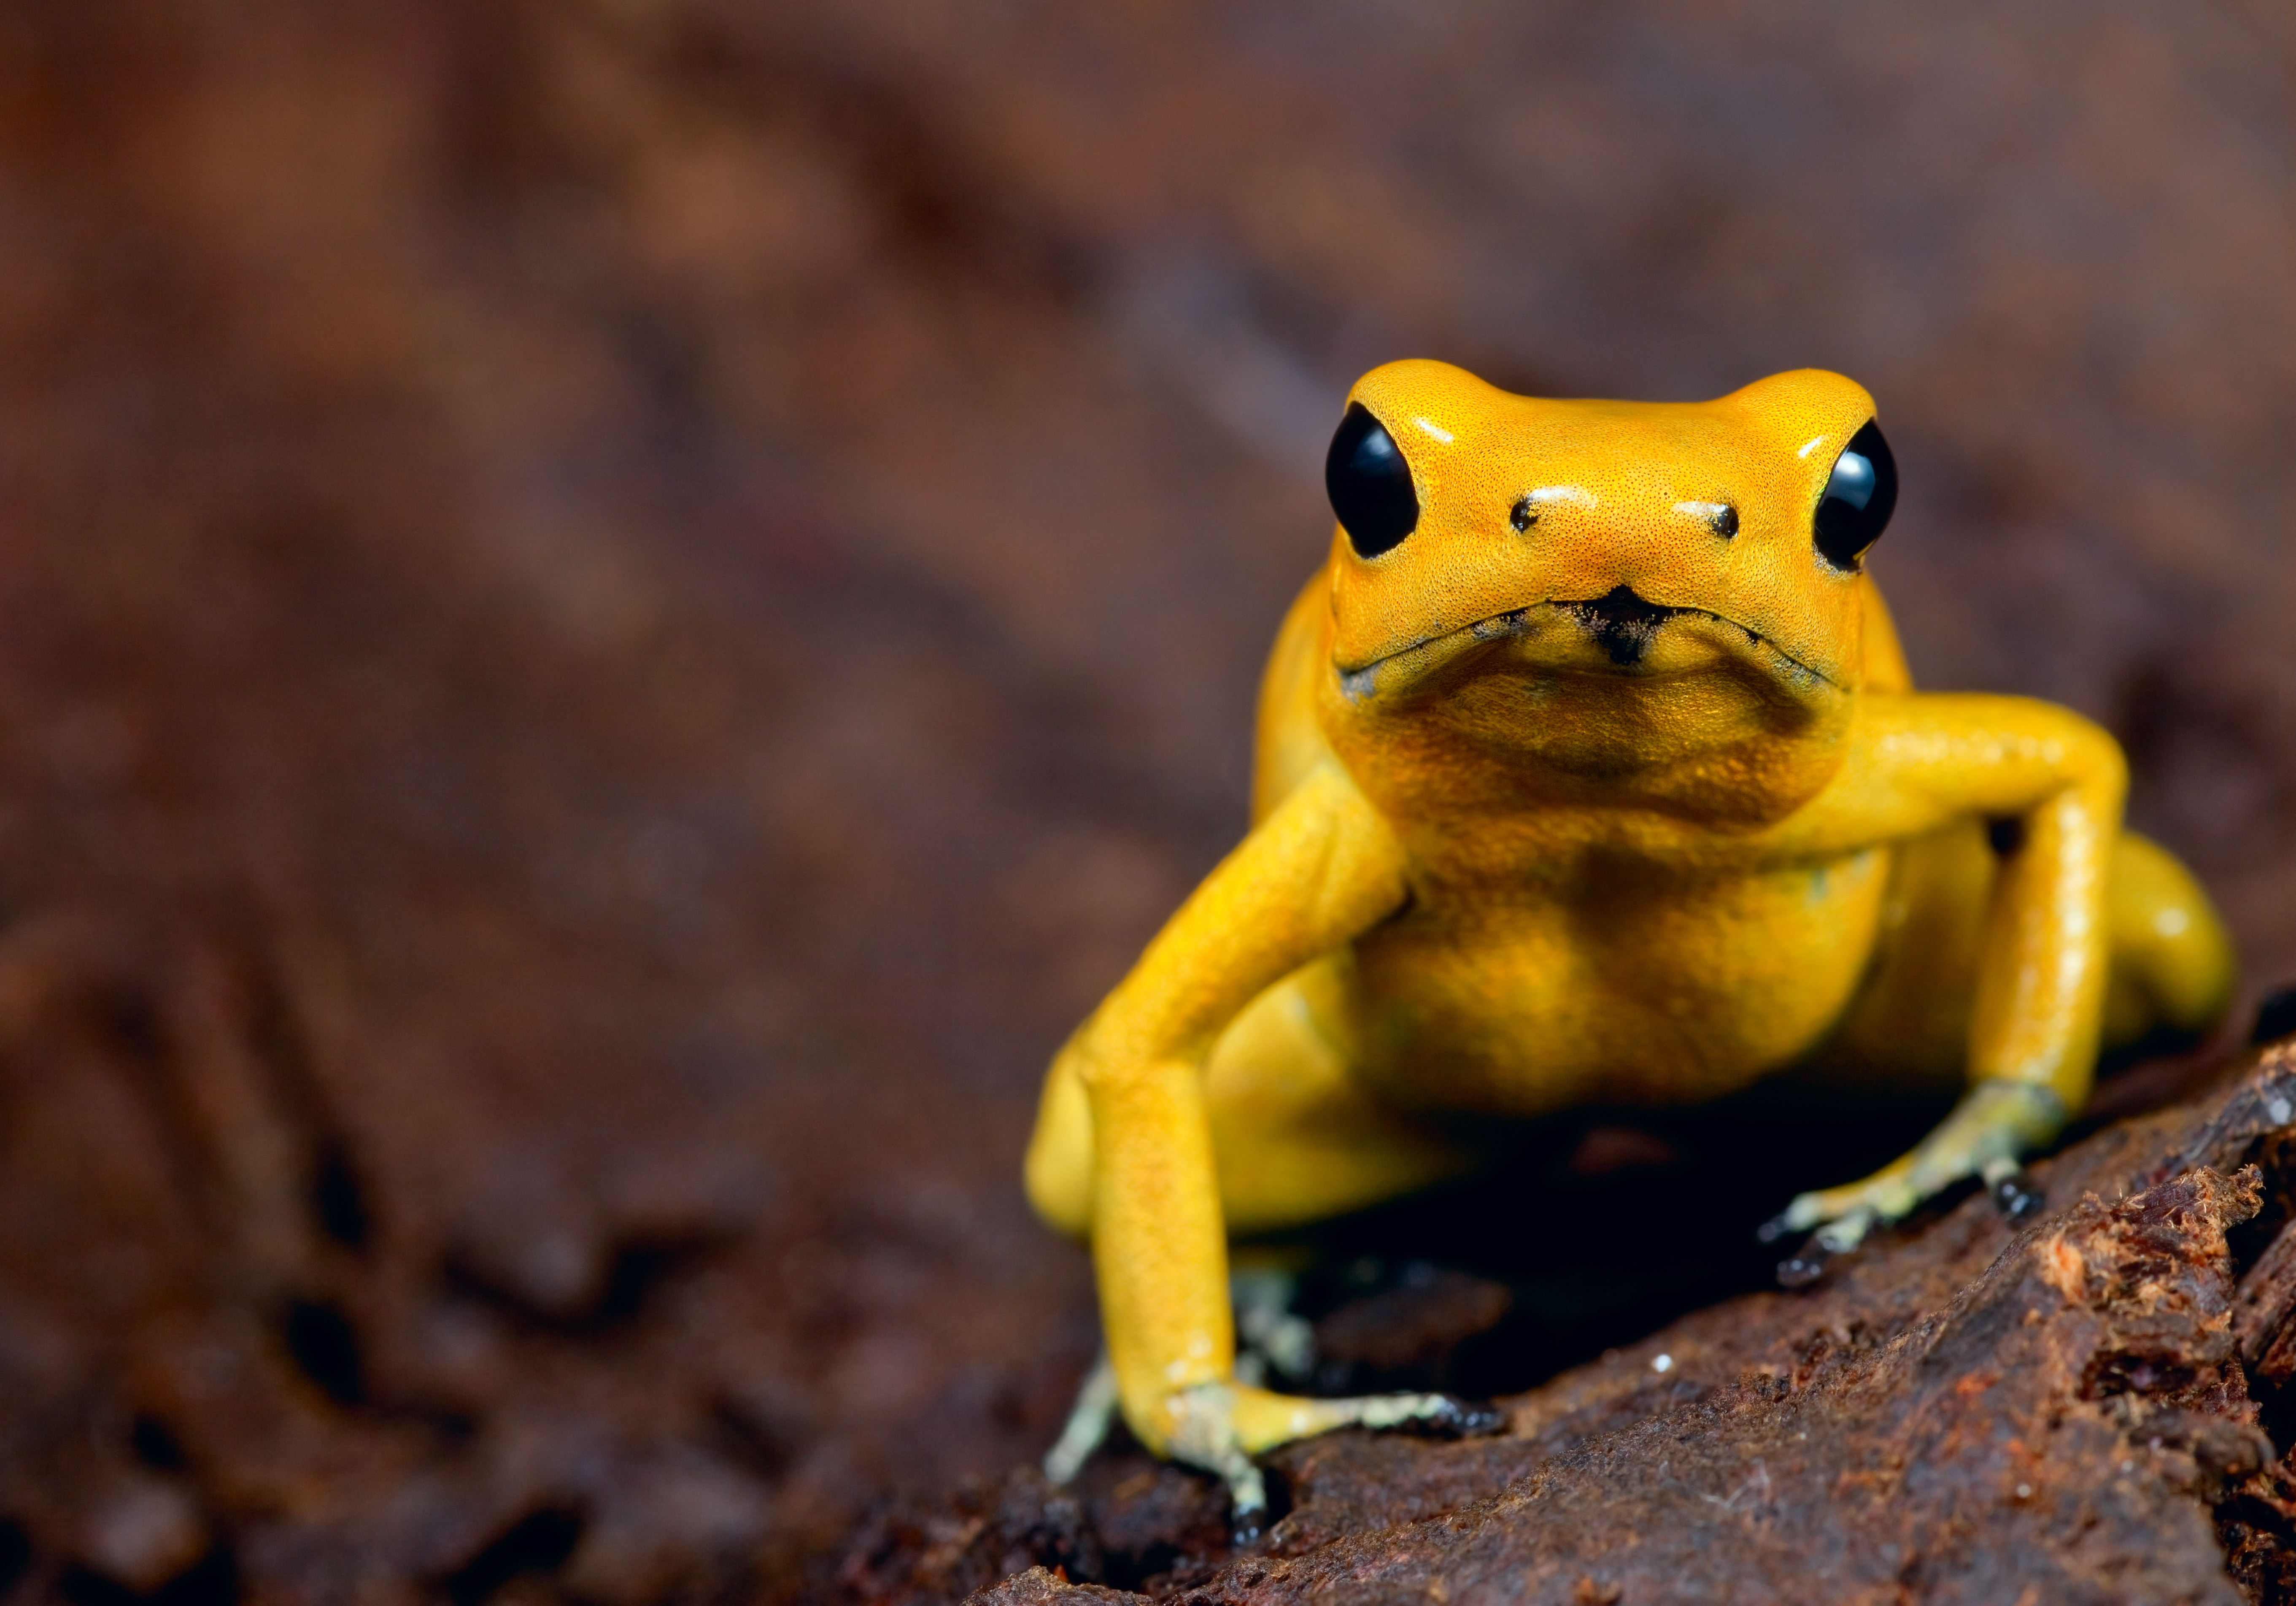 How Deadly Are Poison Dart Frogs?